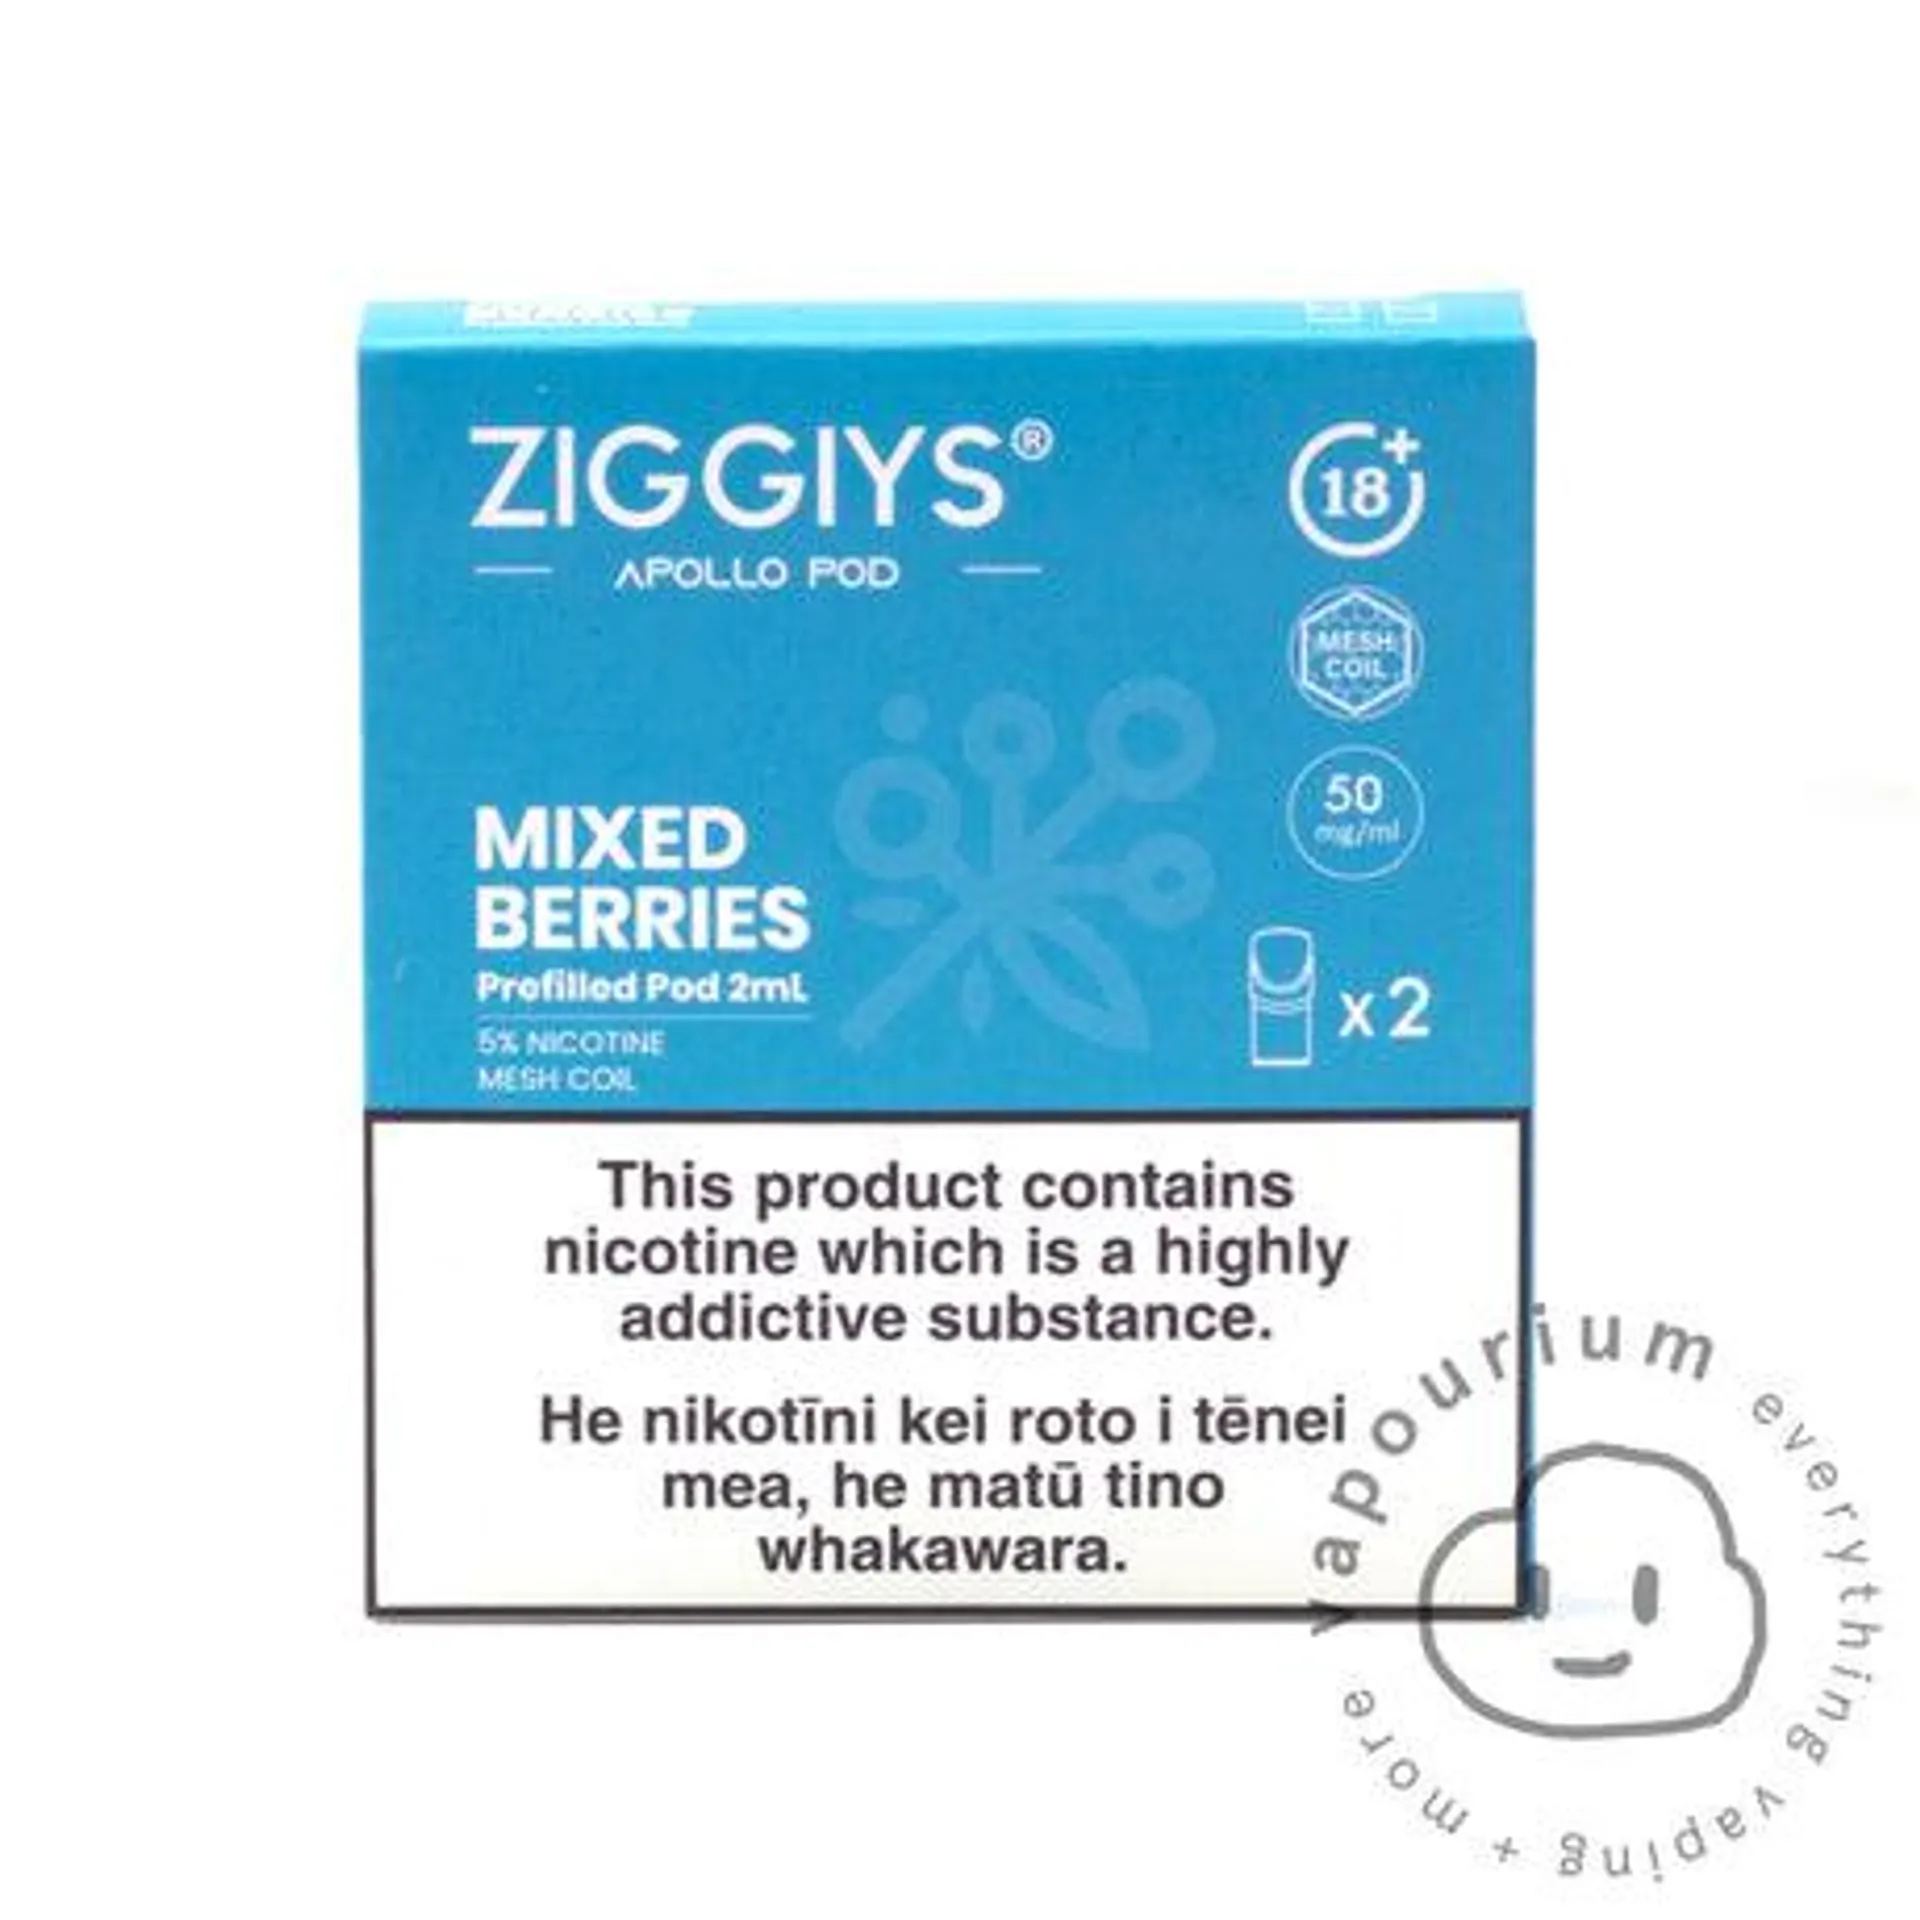 Ziggiys Apollo Prefilled Replacement Pods - 2 Pack - Mixed Berries